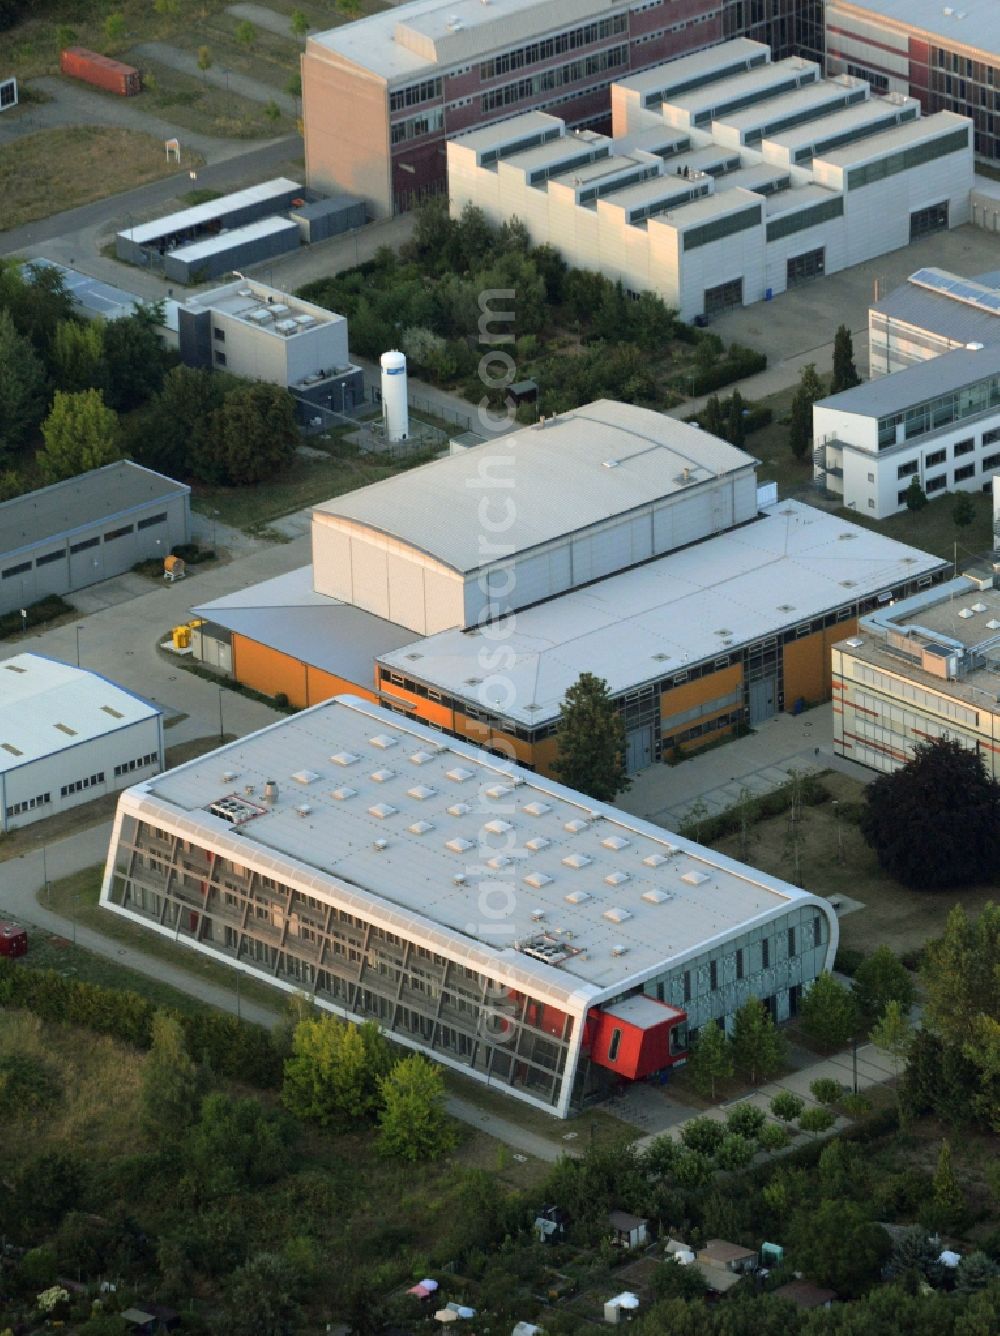 Aerial image Cottbus - Campus and buildings of the Technical University of Cottbus in the state of Brandenburg. The compound includes several buildings and technical facilities of the Chair of Automation Technology